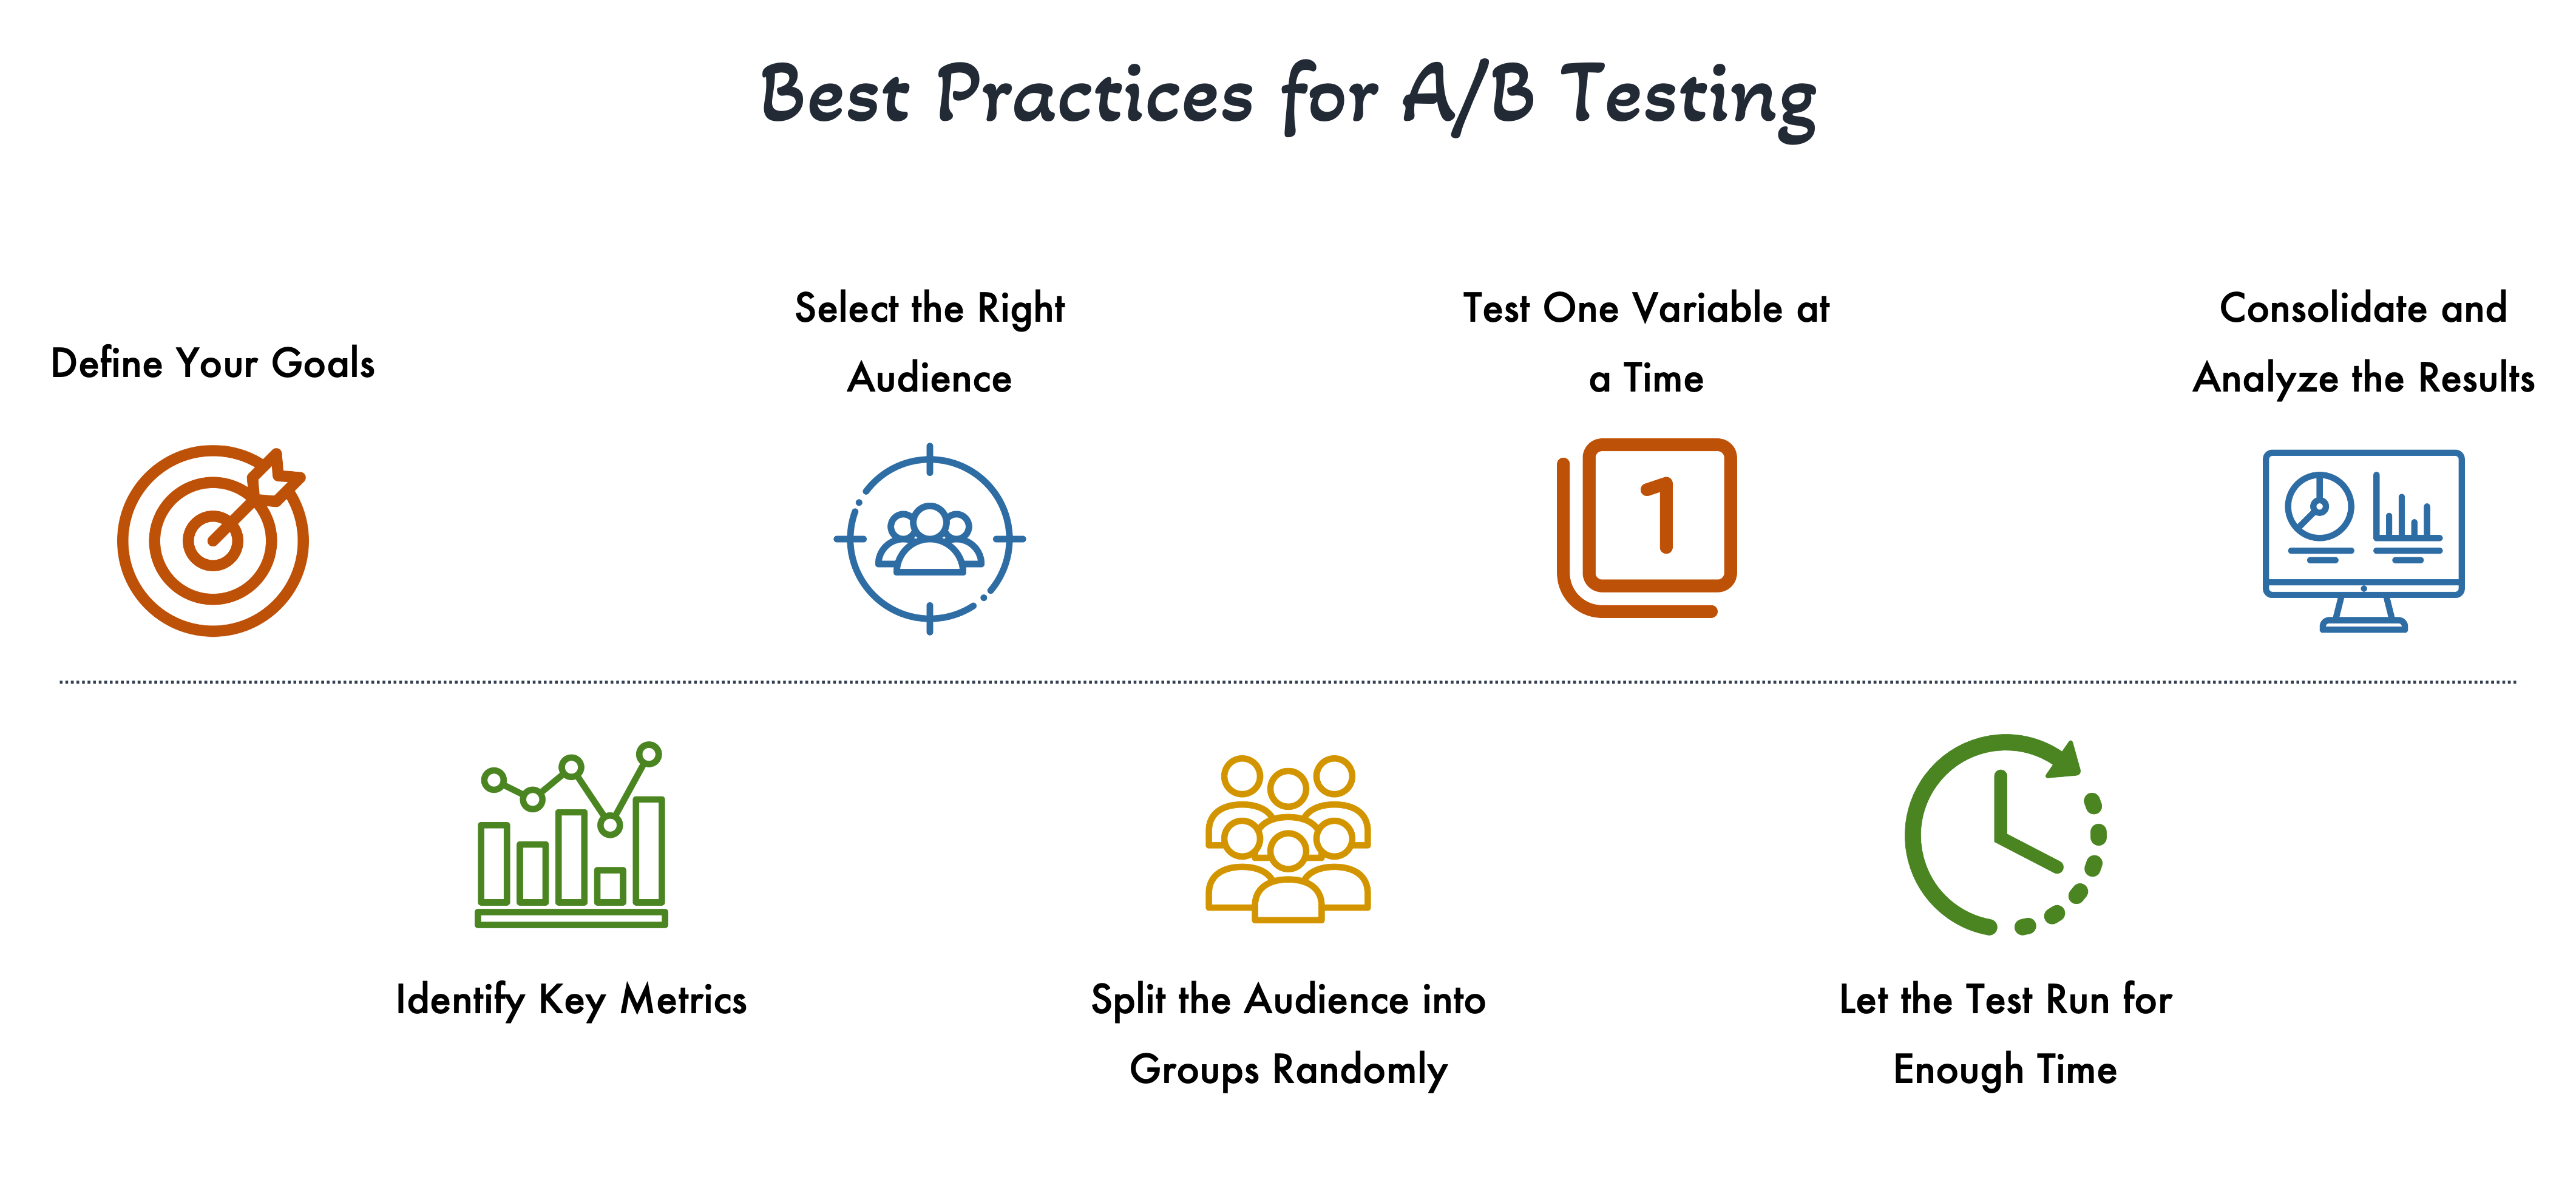 Best Practices for A/B Testing